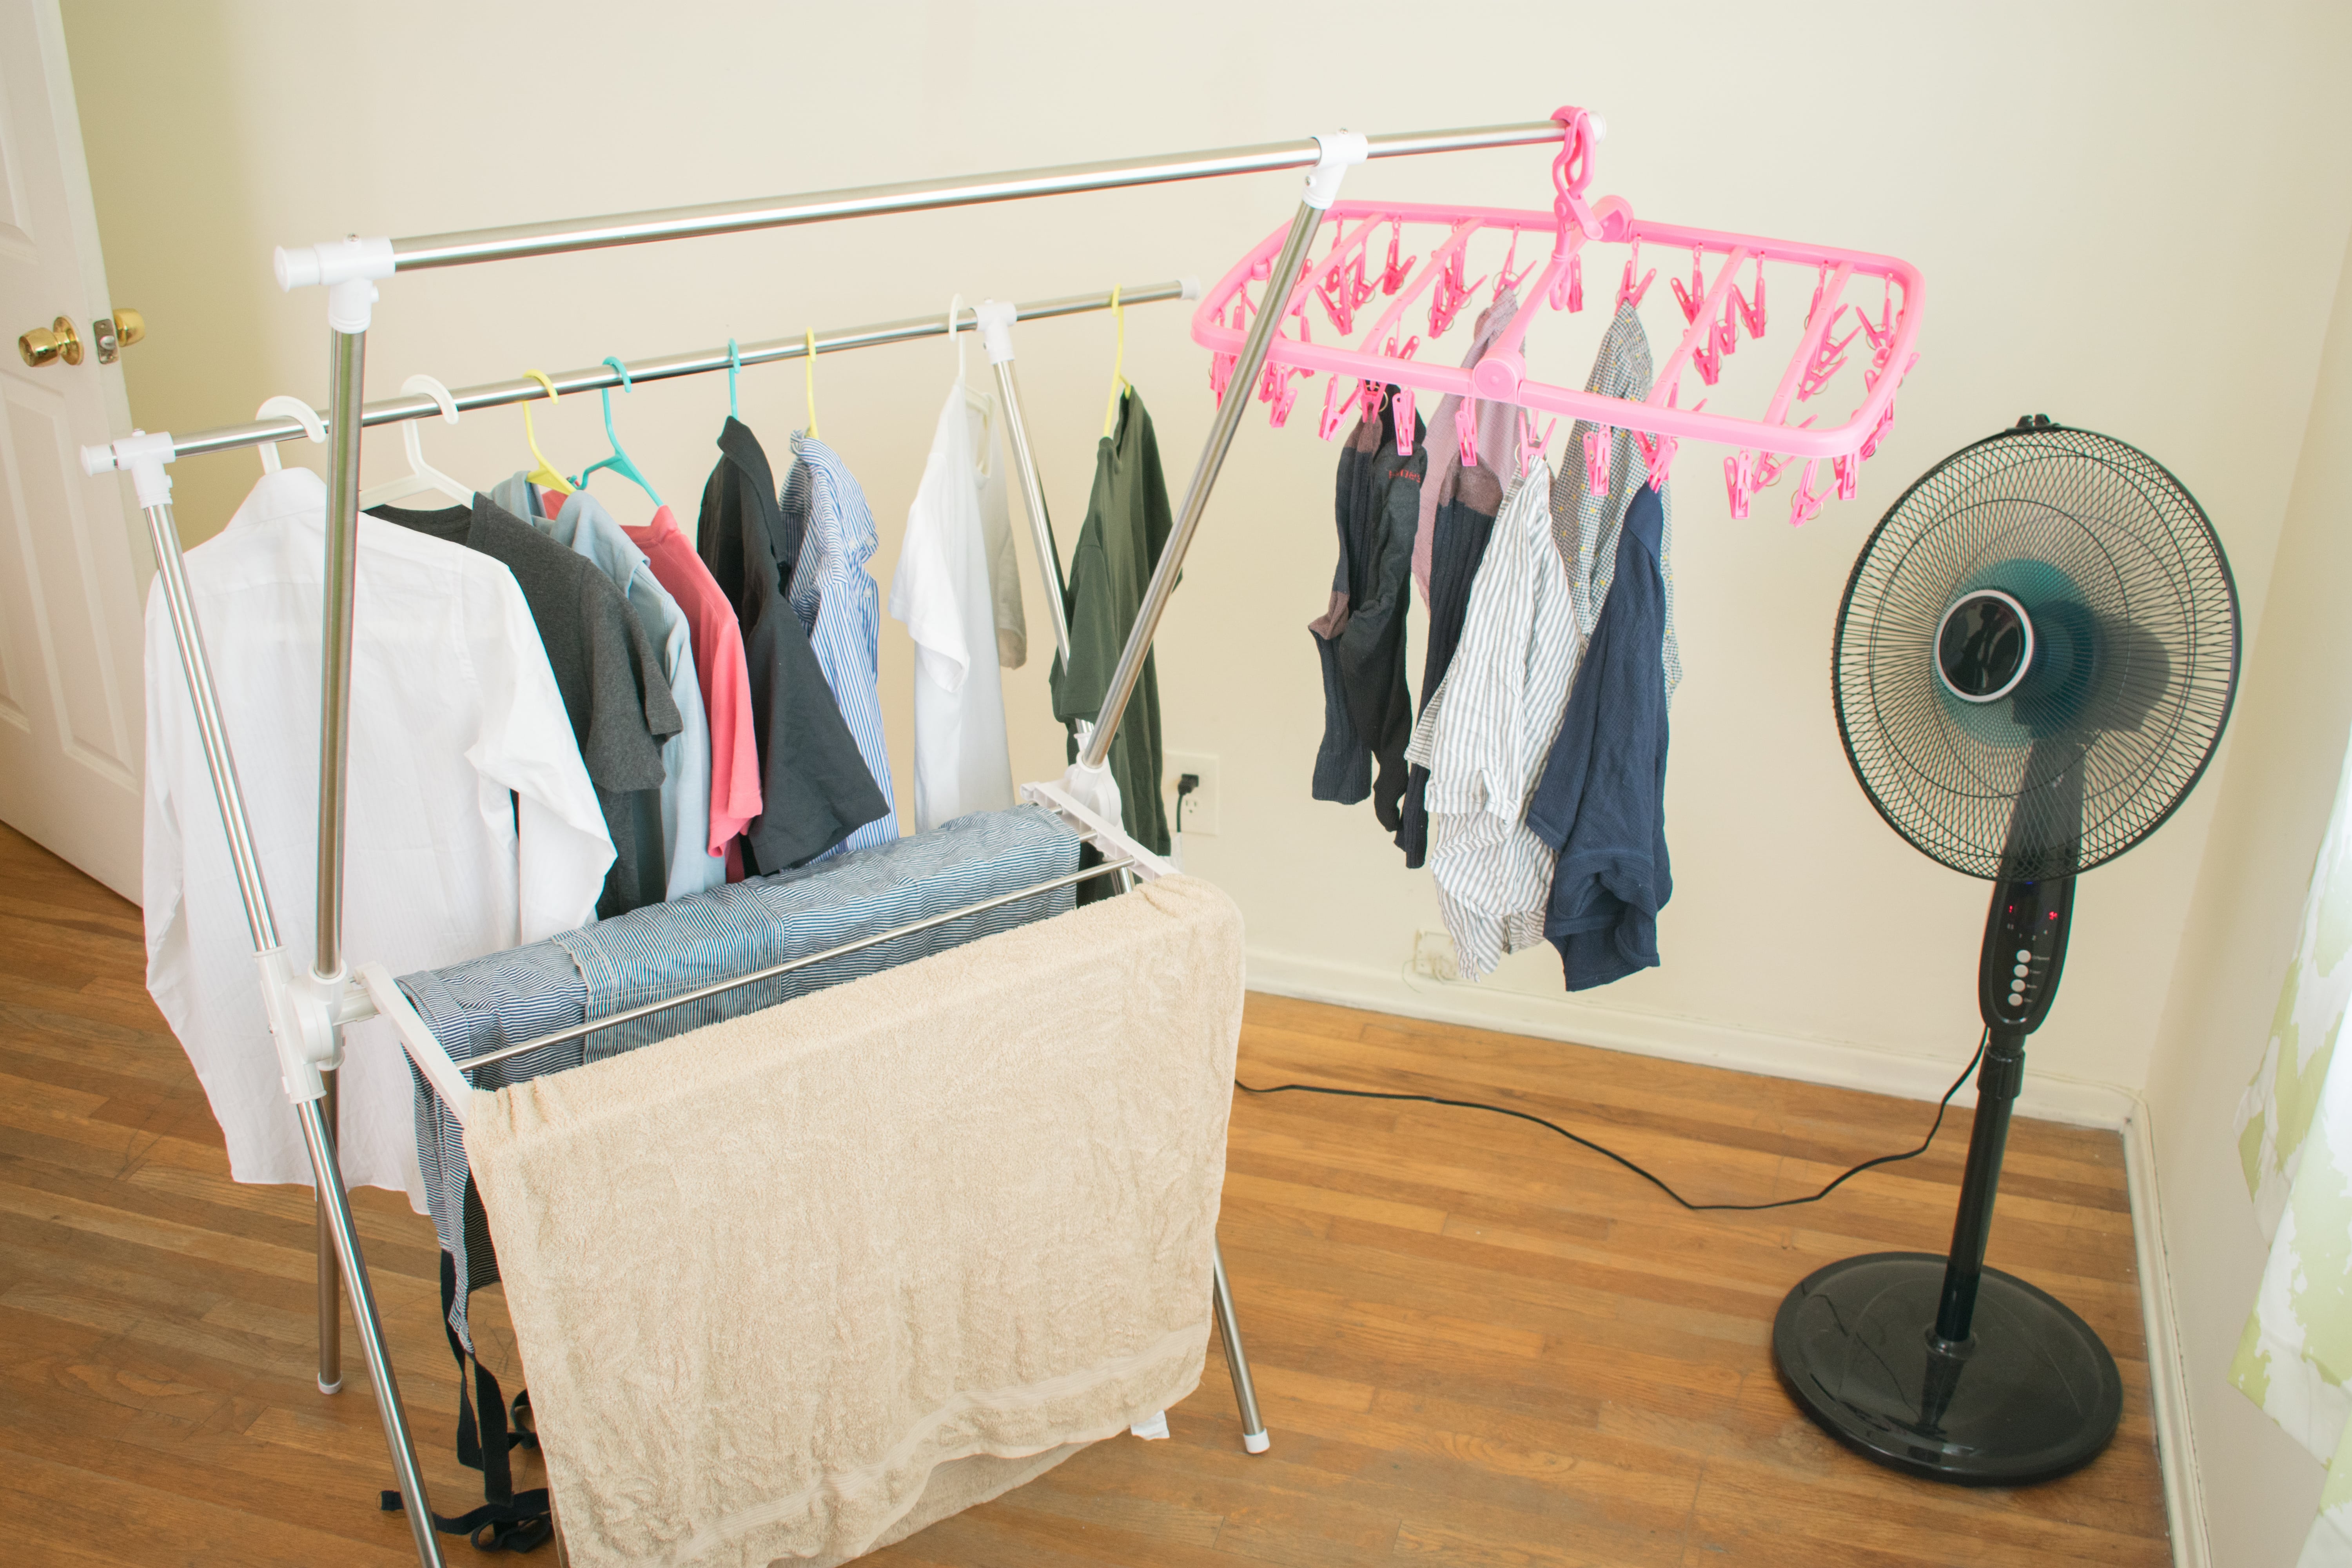 A floor-standing fan positioned next to an indoor clothes airer to circulate the air and encourage the washing to dry faster